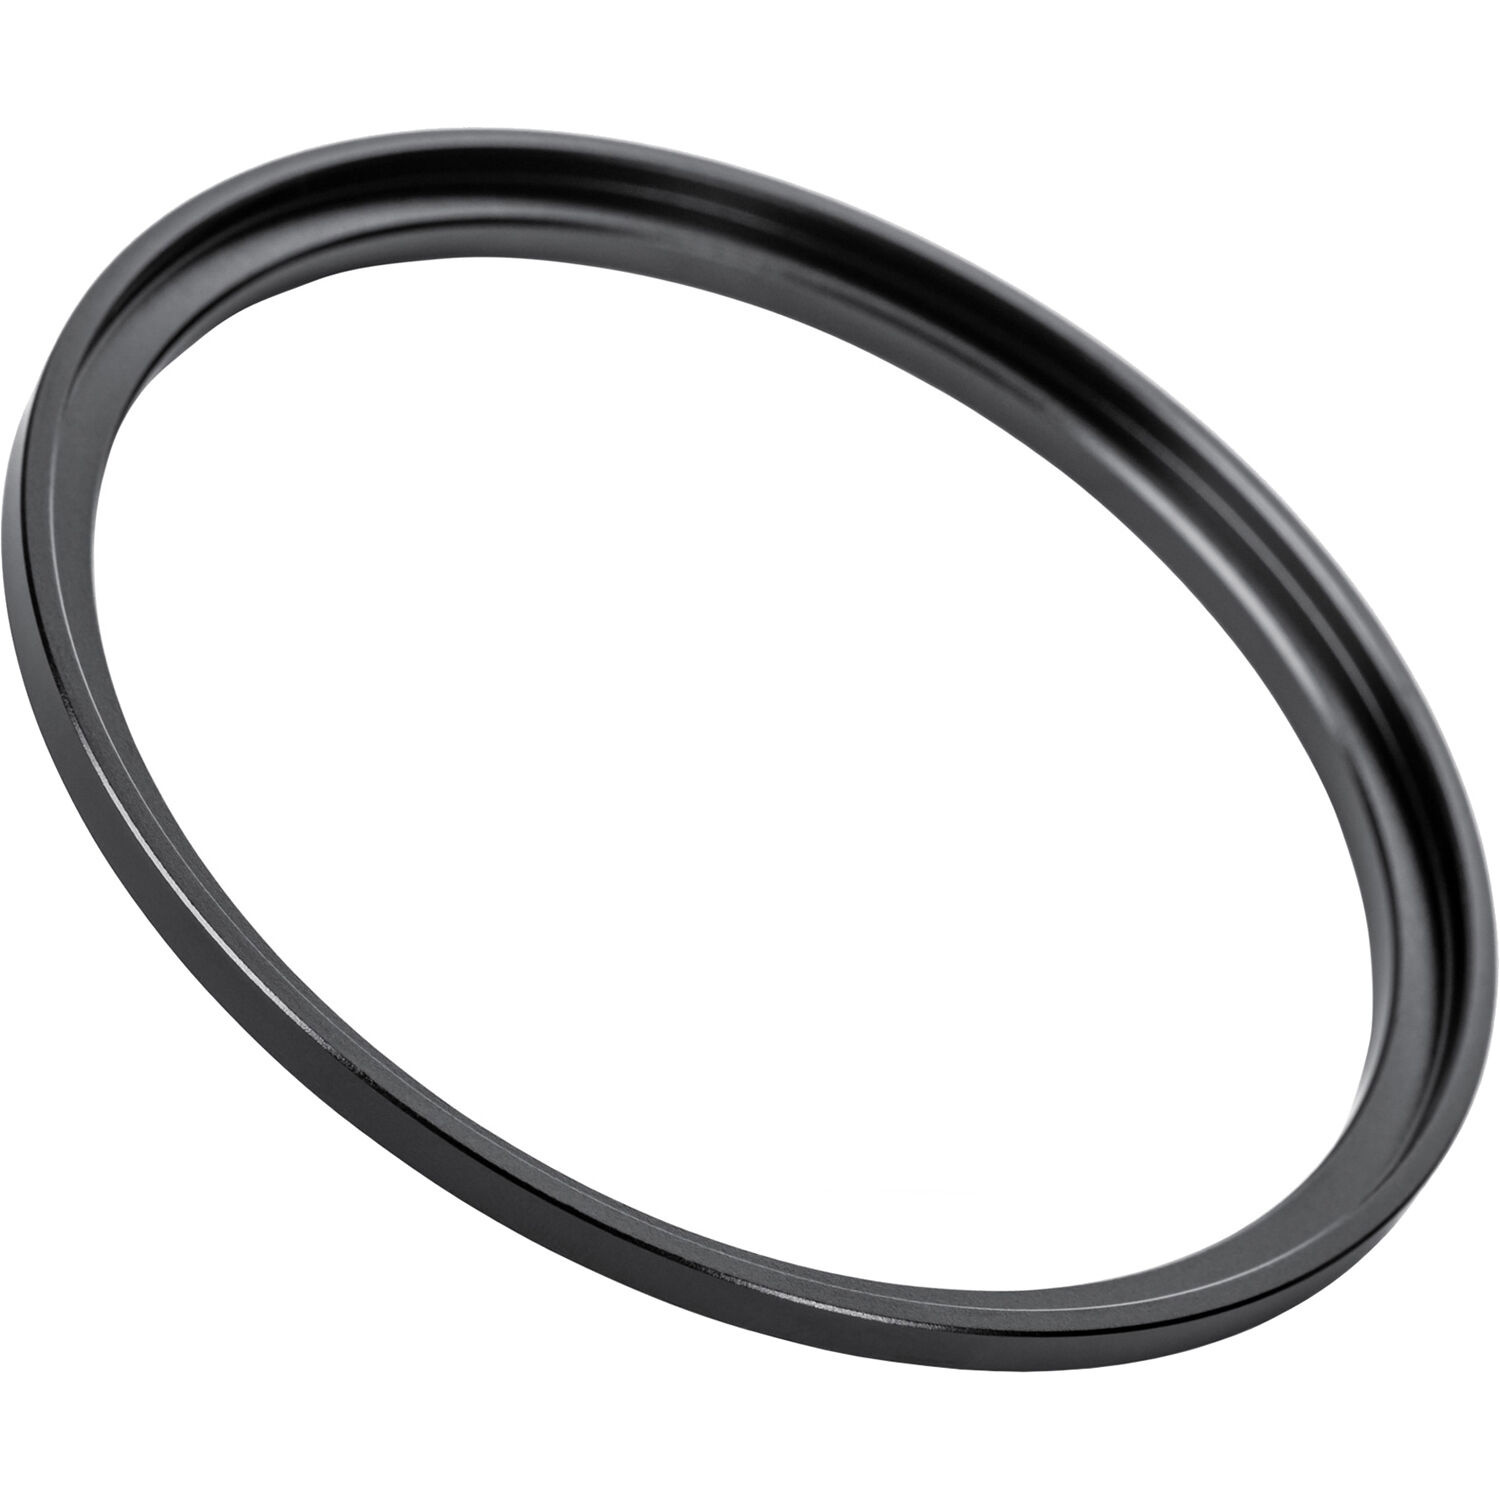 NiSi 82mm Adapter Ring for Swift System Filters